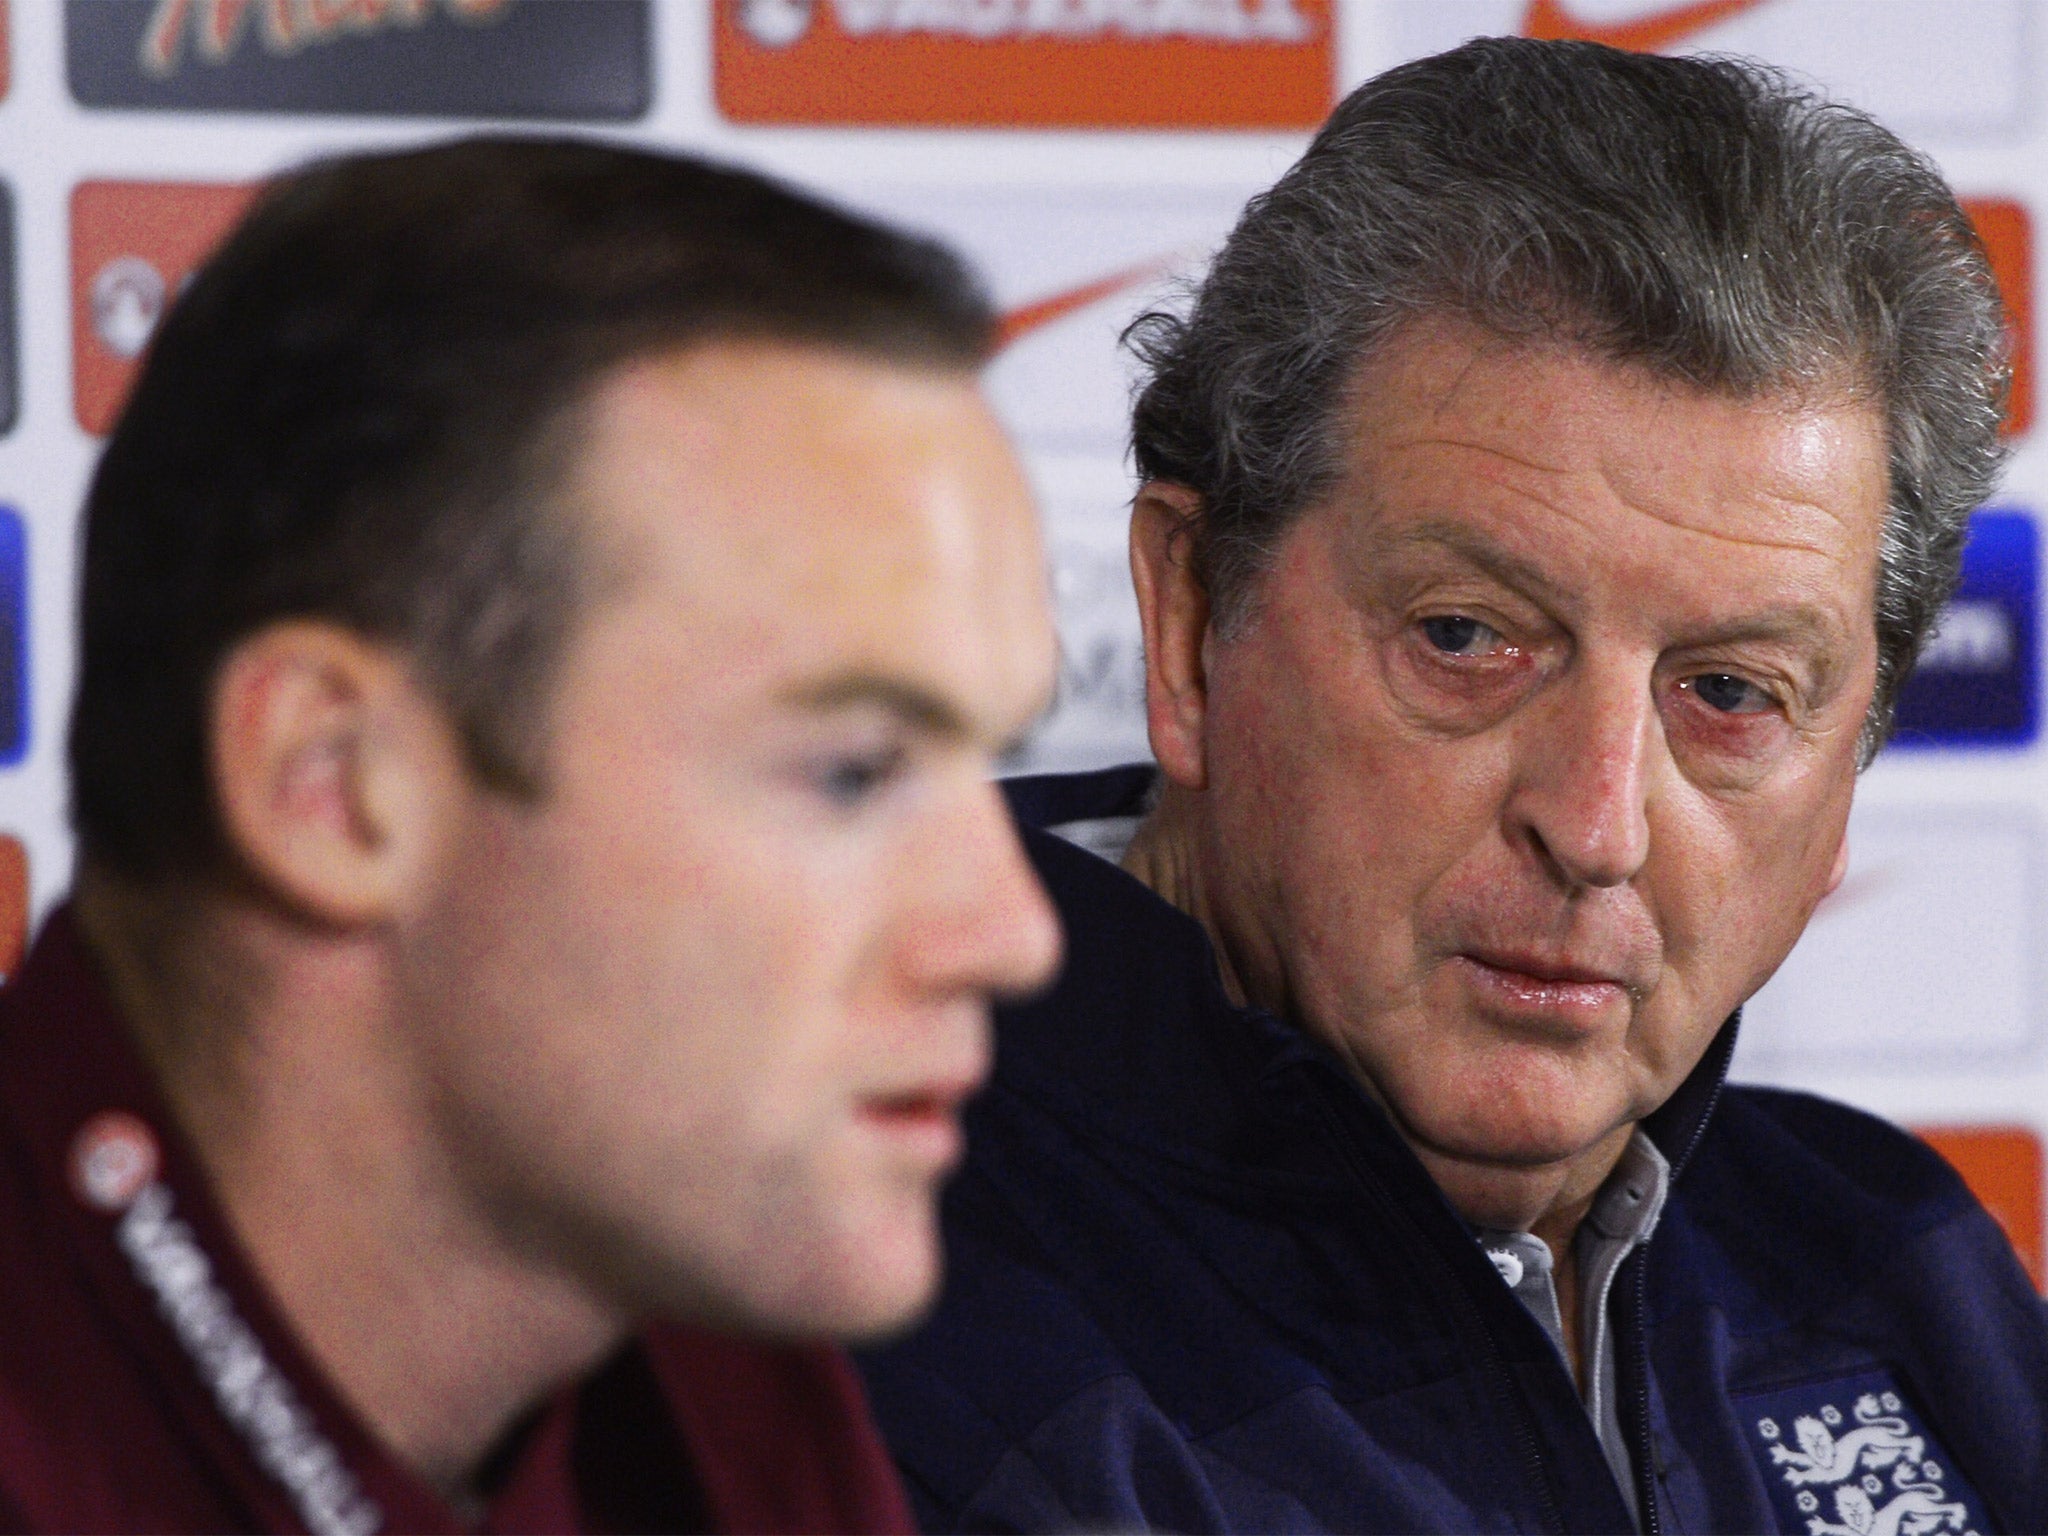 Roy Hodgson (right) listens as Wayne Rooney answers a question during an England press conference